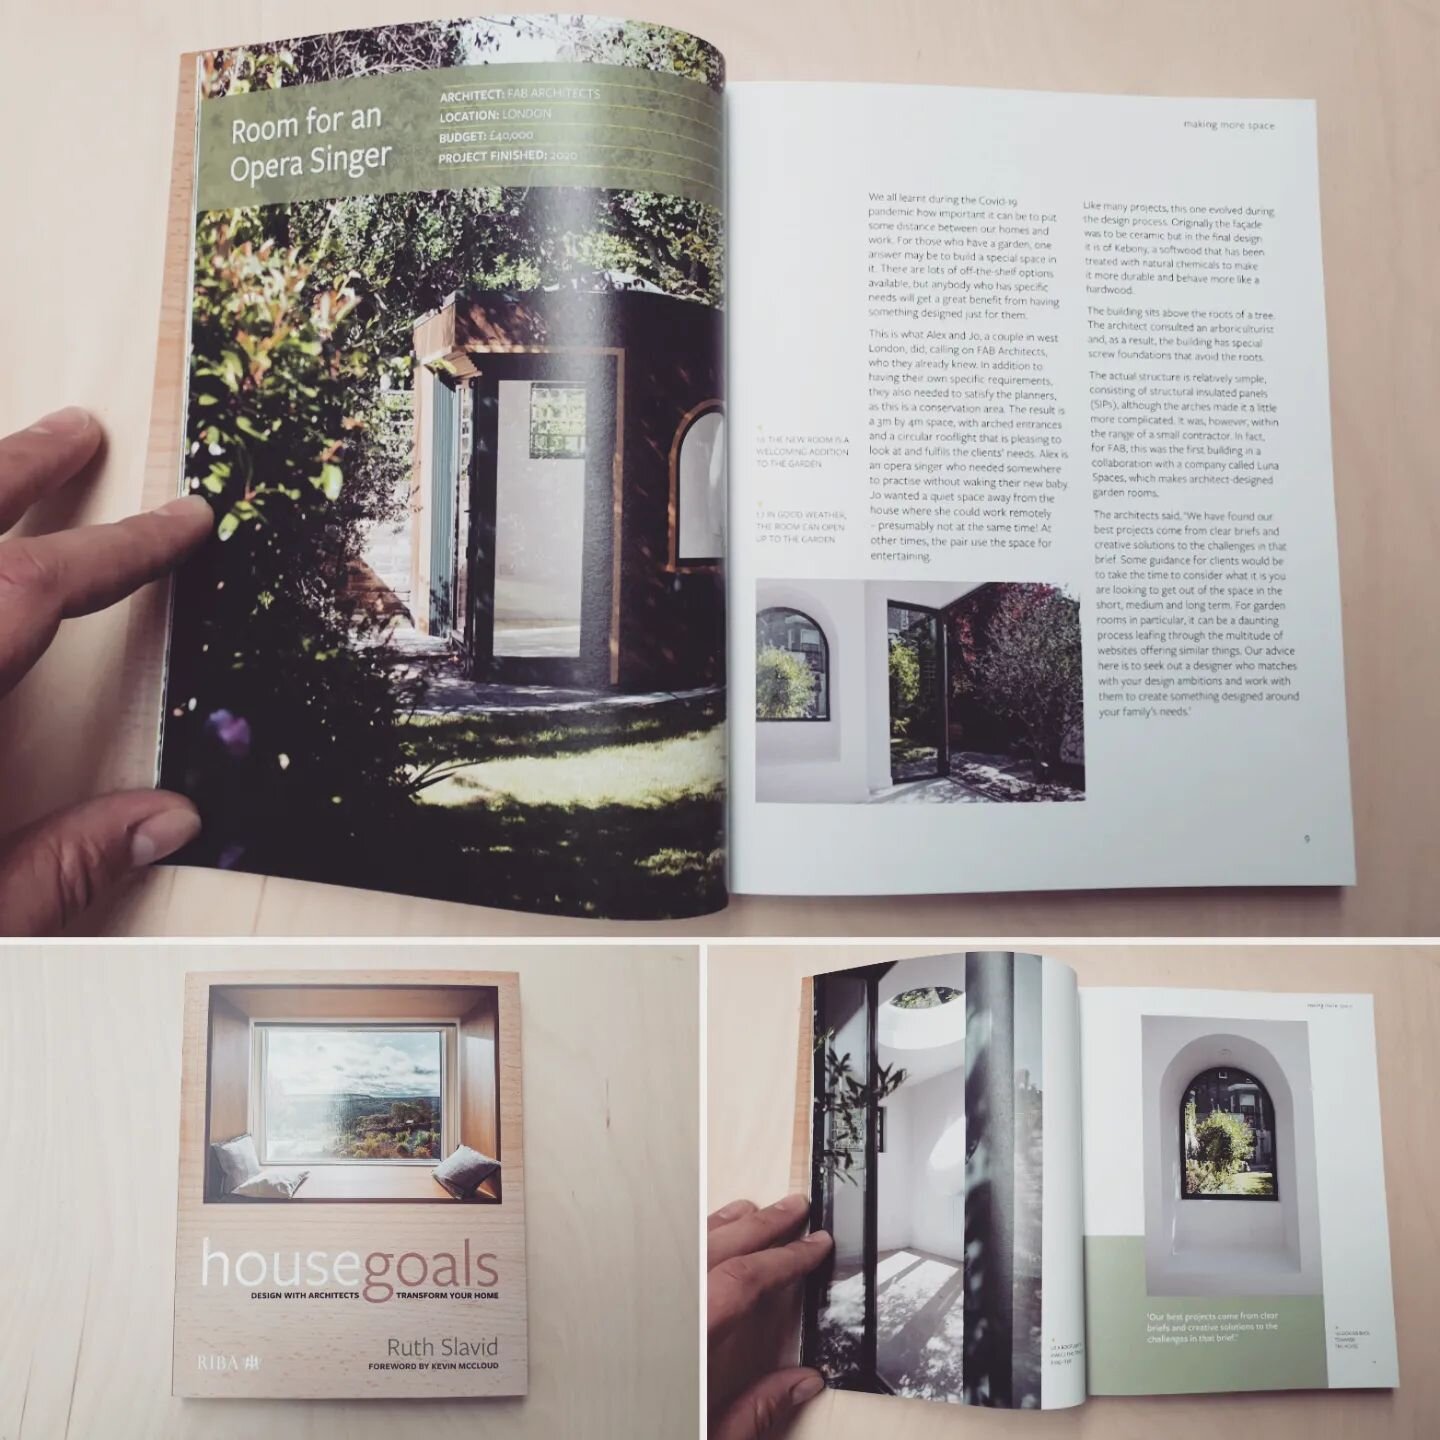 Very proud to see 'A Room for an Opera Singer' featured in this amazing book! 
House Goals: Design with architects, transform your home - showcases the best examples of what can be achieved when homeowners collaborate with RIBA-certified architects t